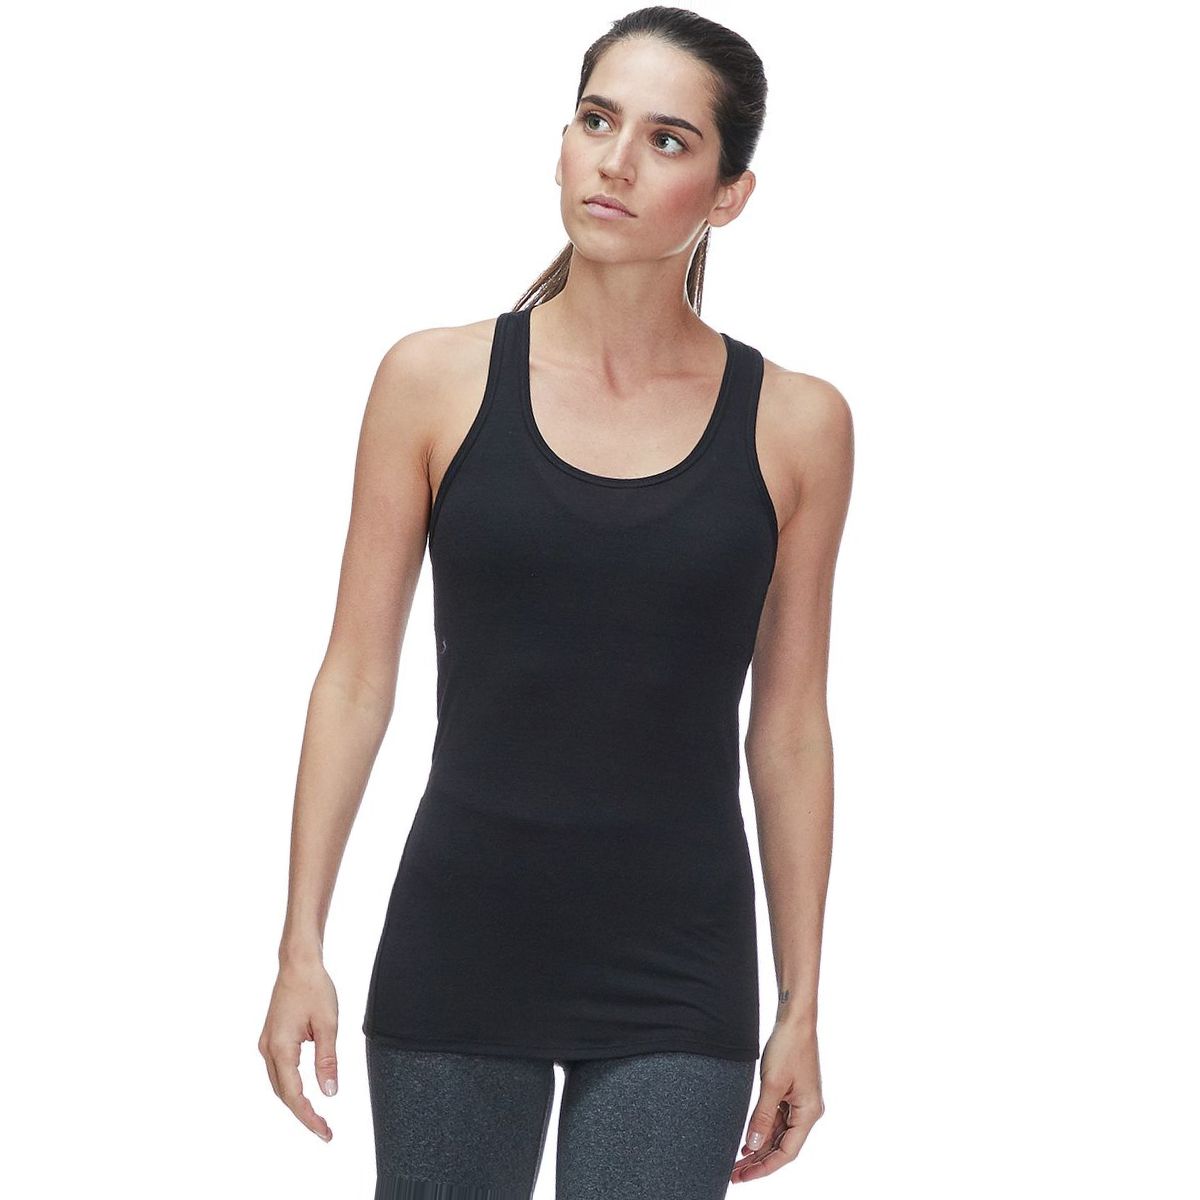 The North Face Workout Racerback Tank Top - Women's